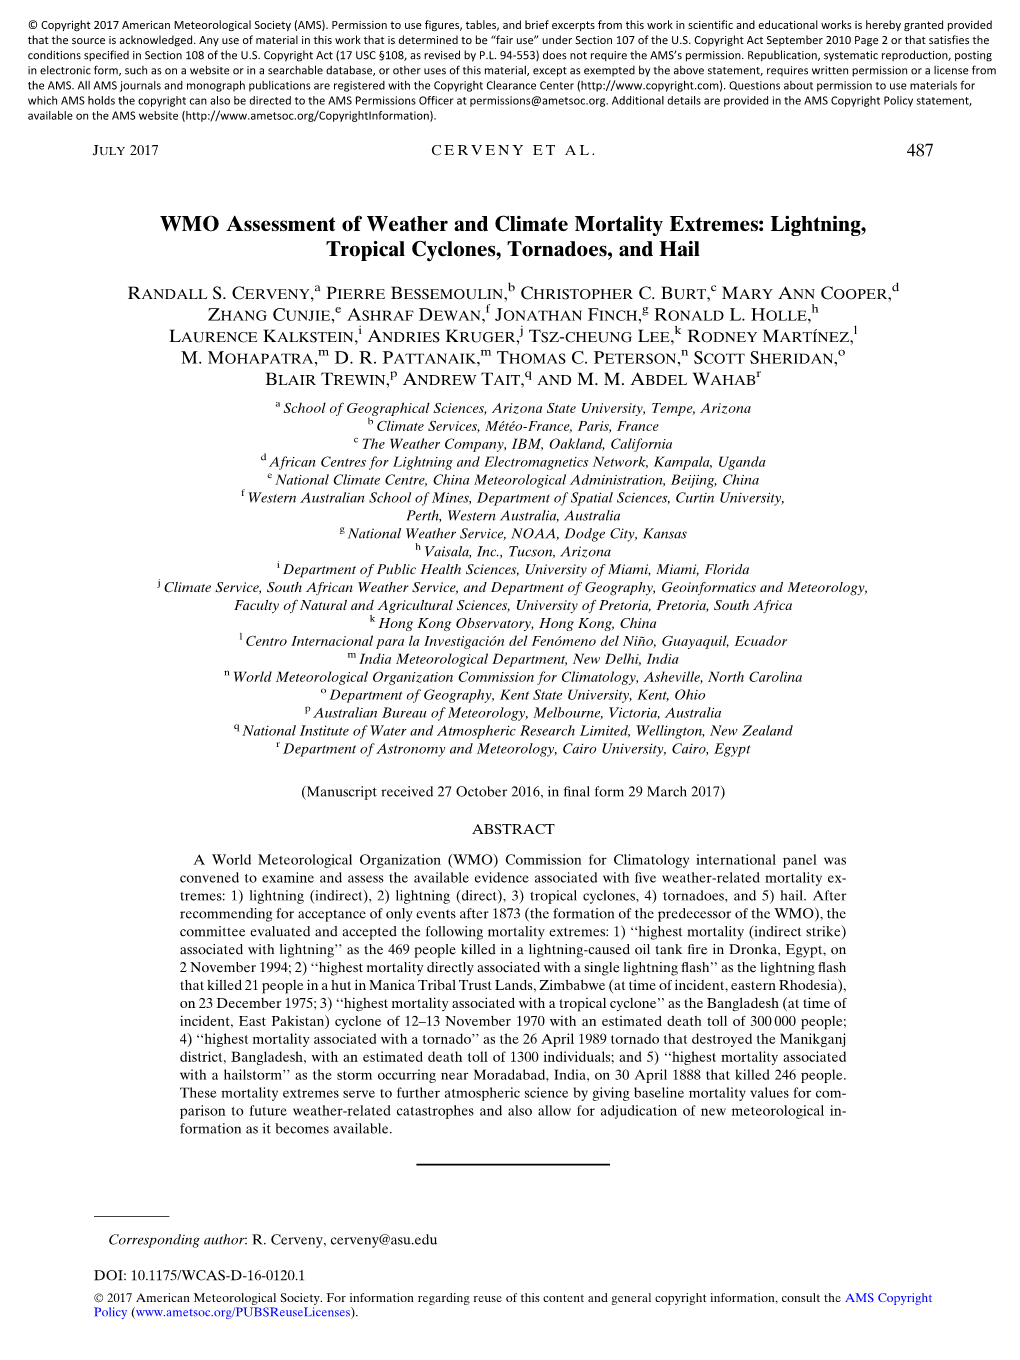 WMO Assessment of Weather and Climate Mortality Extremes: Lightning, Tropical Cyclones, Tornadoes, and Hail